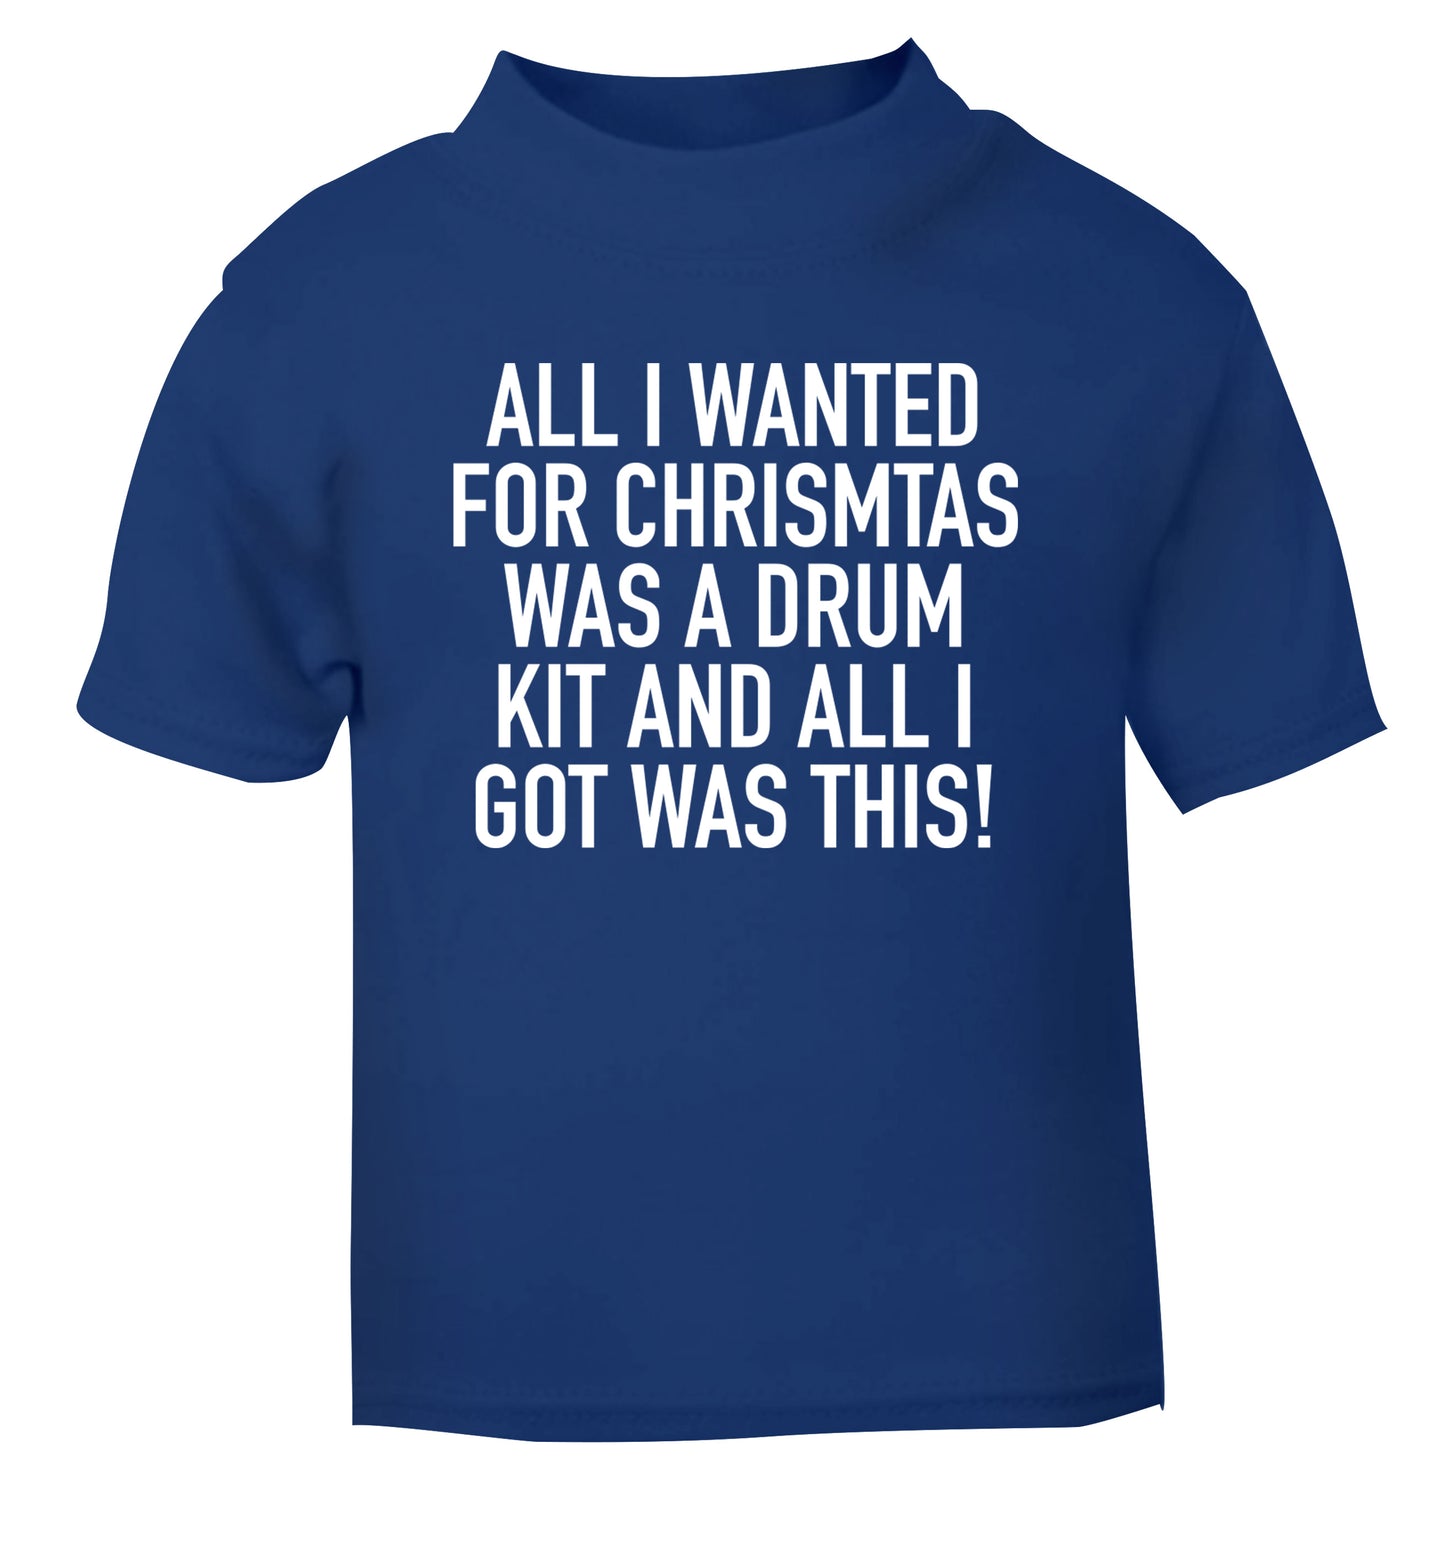 All I wanted for Christmas was a drum kit and all I got was this! blue Baby Toddler Tshirt 2 Years